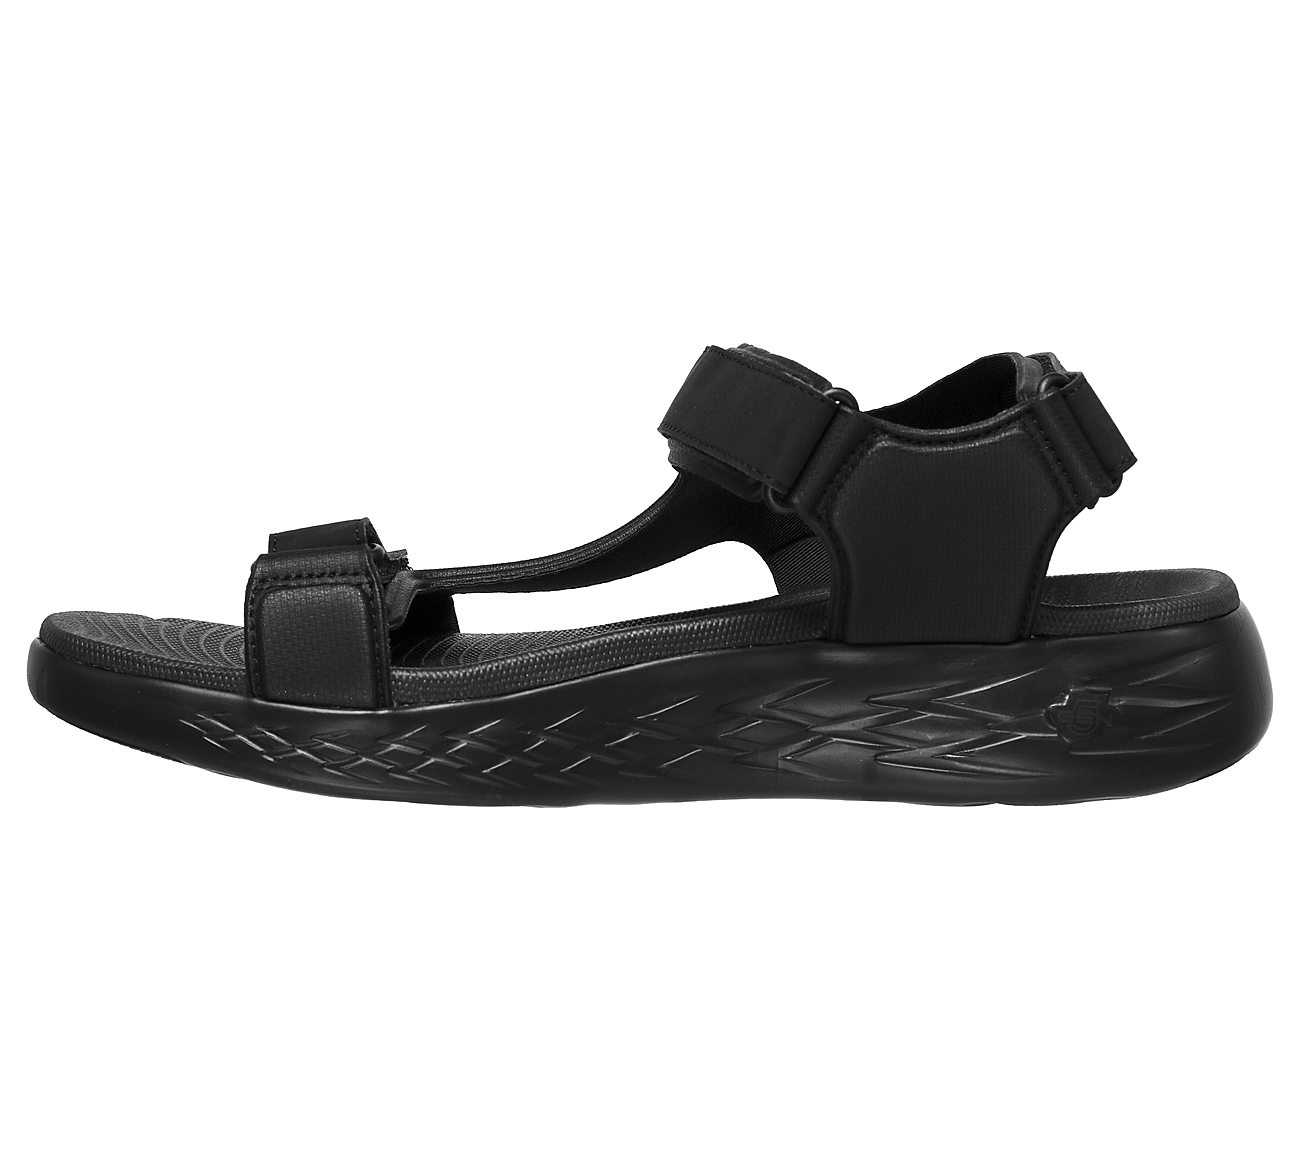 ON-THE-GO 600 - VENTURE, BLACK/LIME Footwear Left View